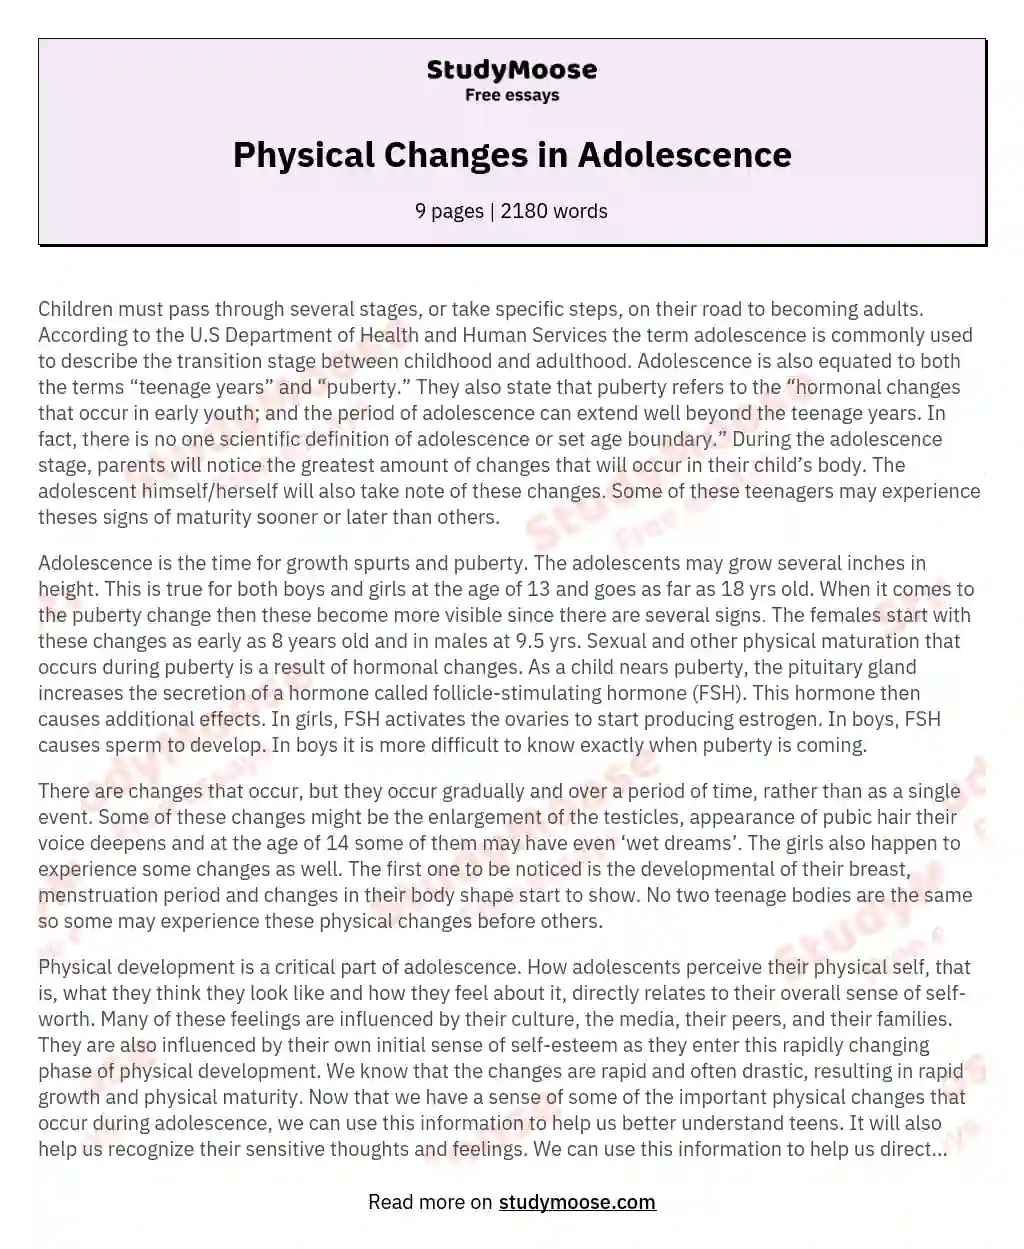 Physical Changes in Adolescence essay